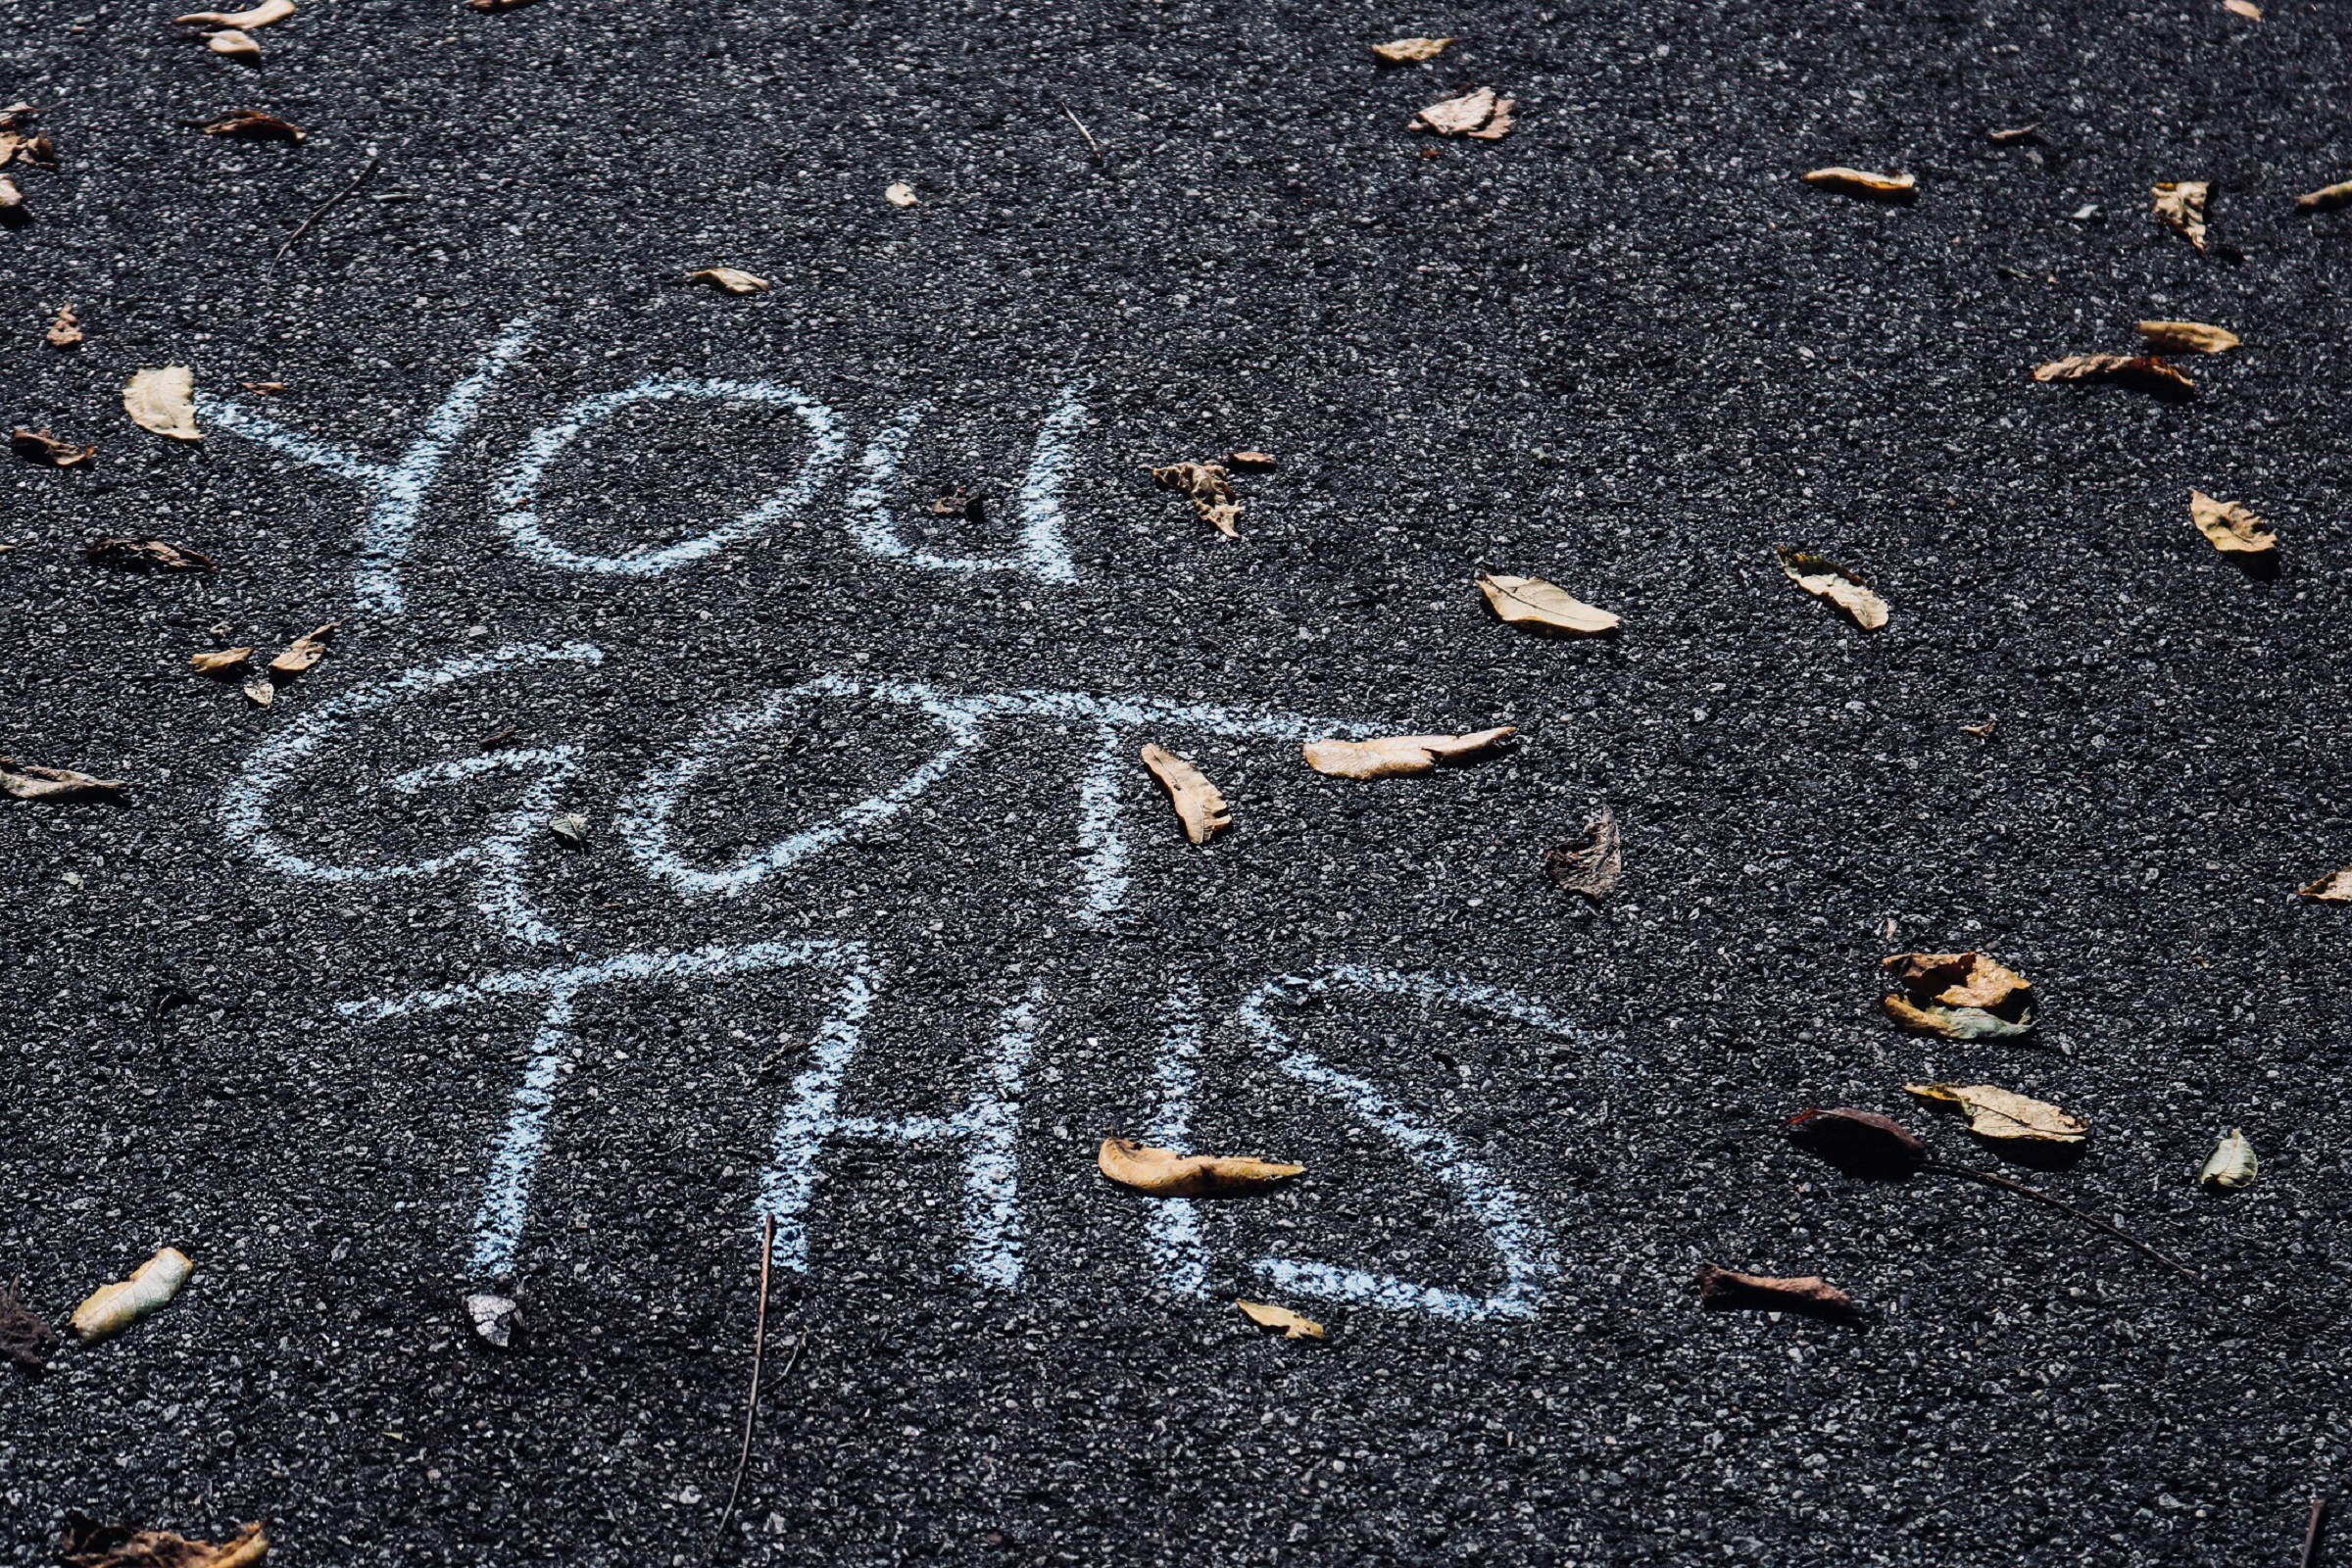 "You got this" written in blue chalk on a road.